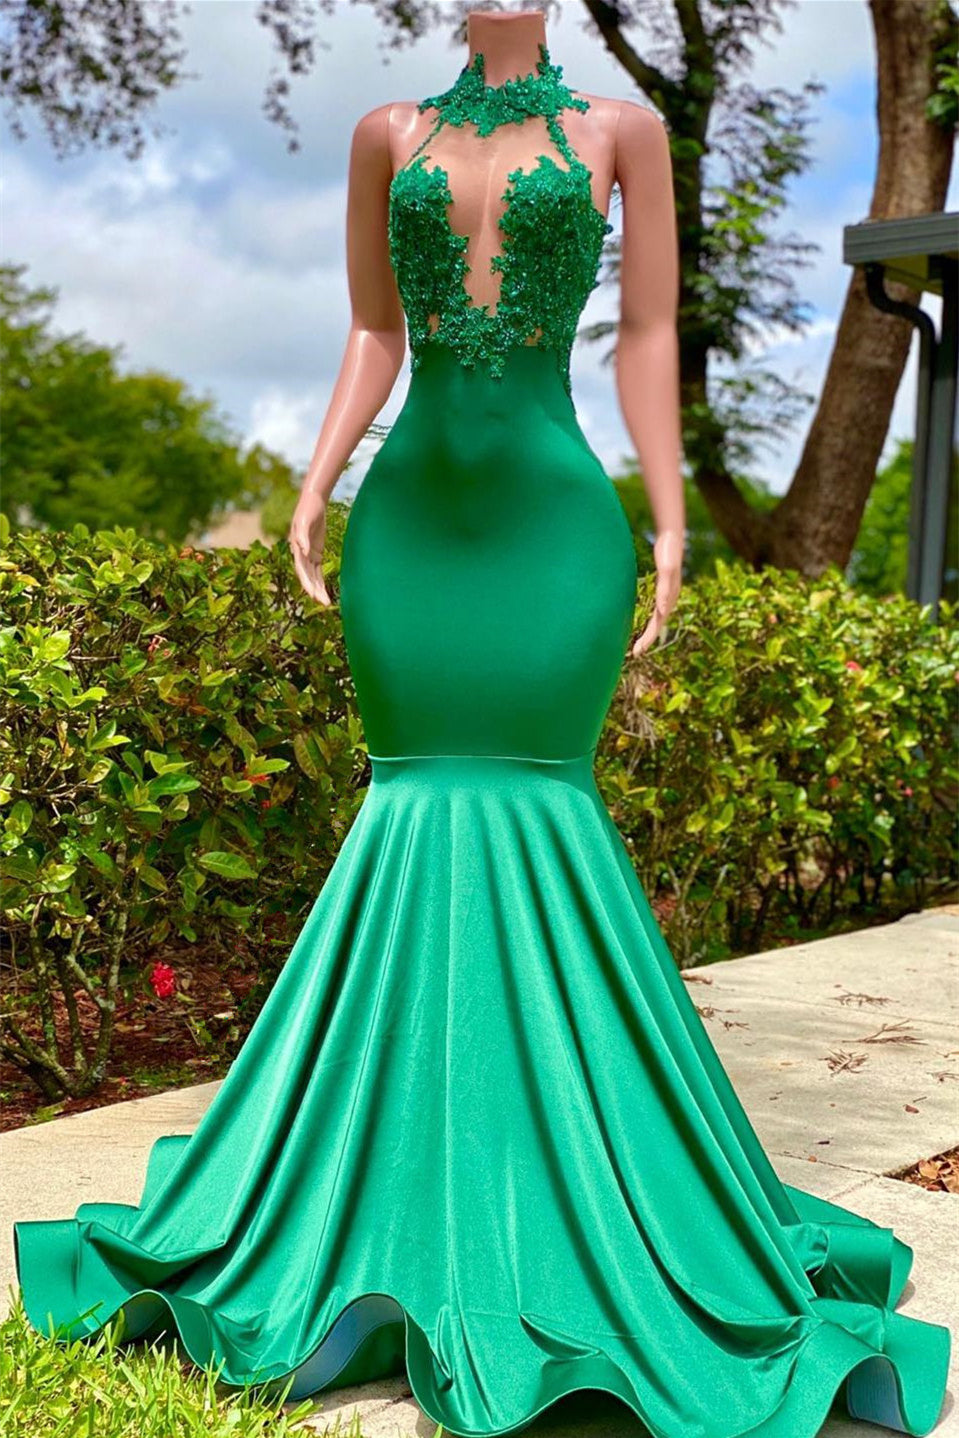 Sleeveless Mermaid Prom Dress with Open Back and Elegant Appliques